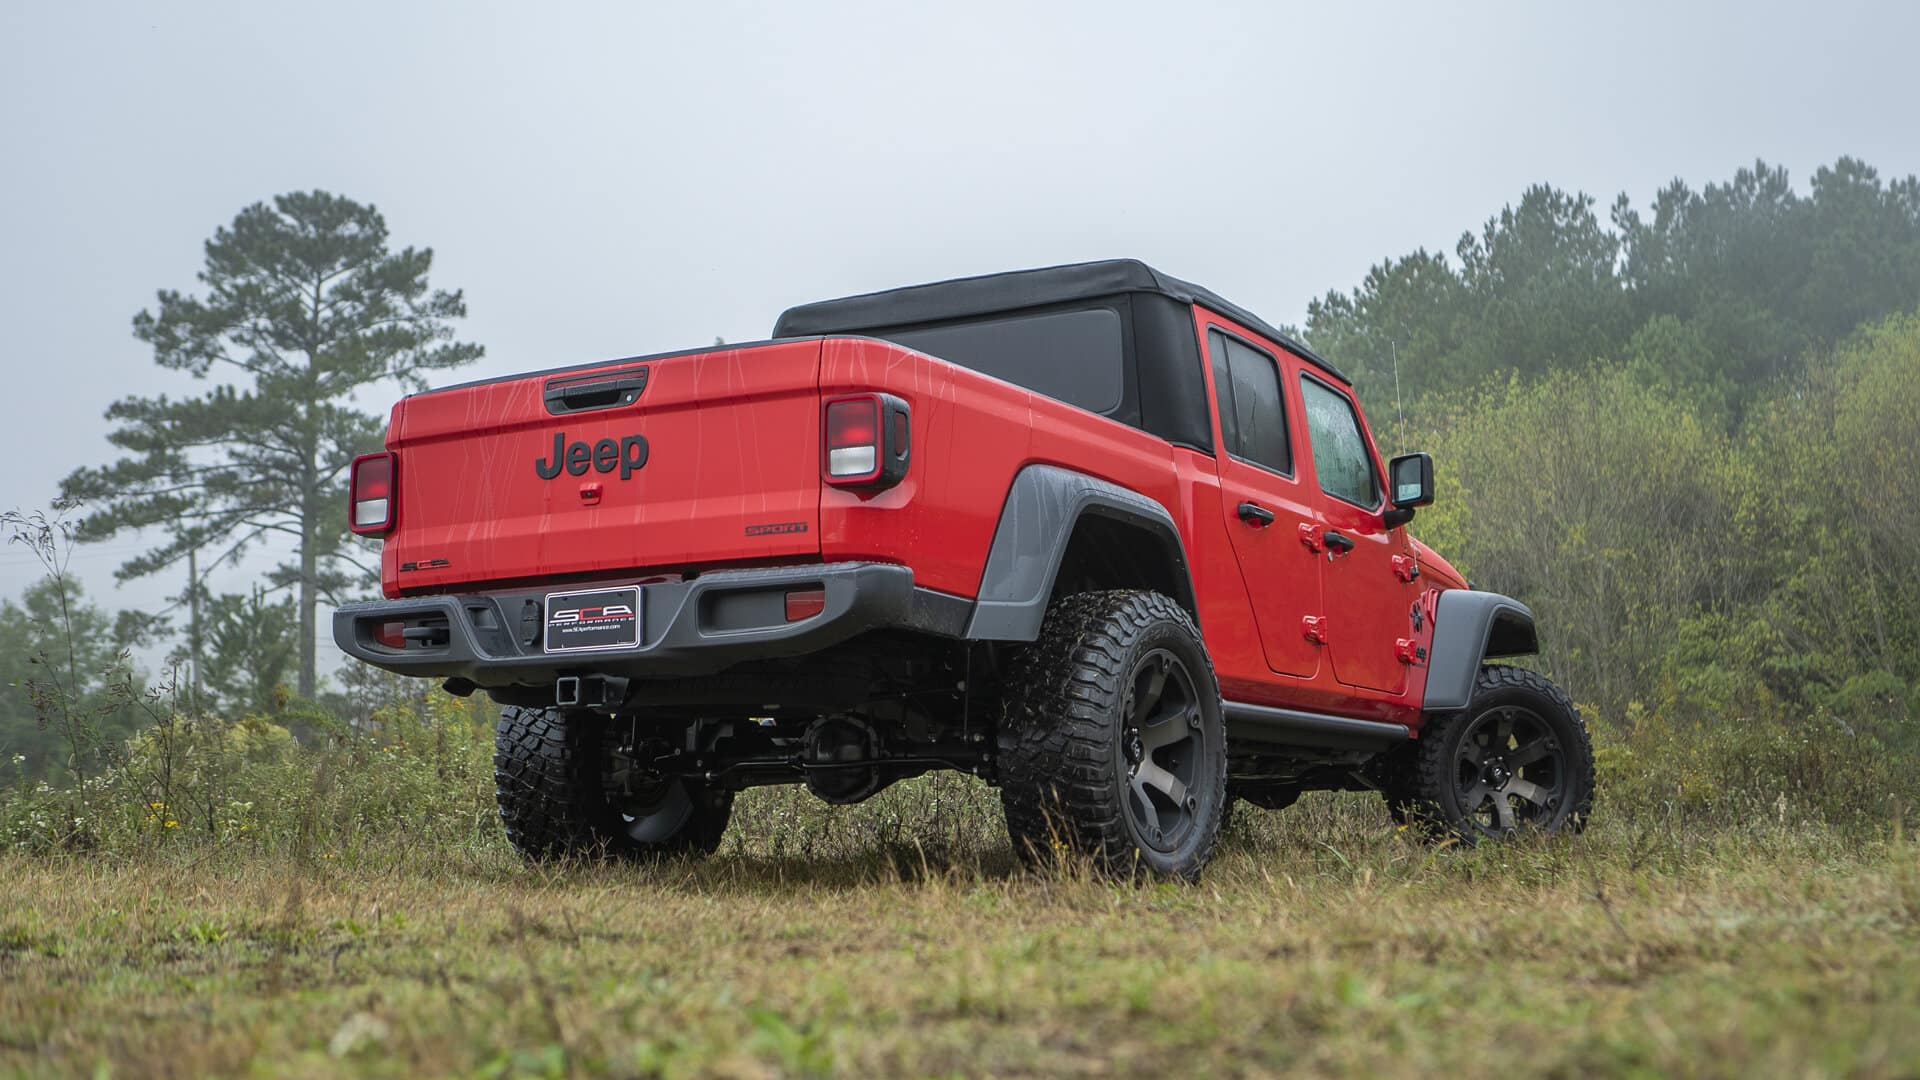 SCA Jeep Gladiator Black Widow Rear in red.